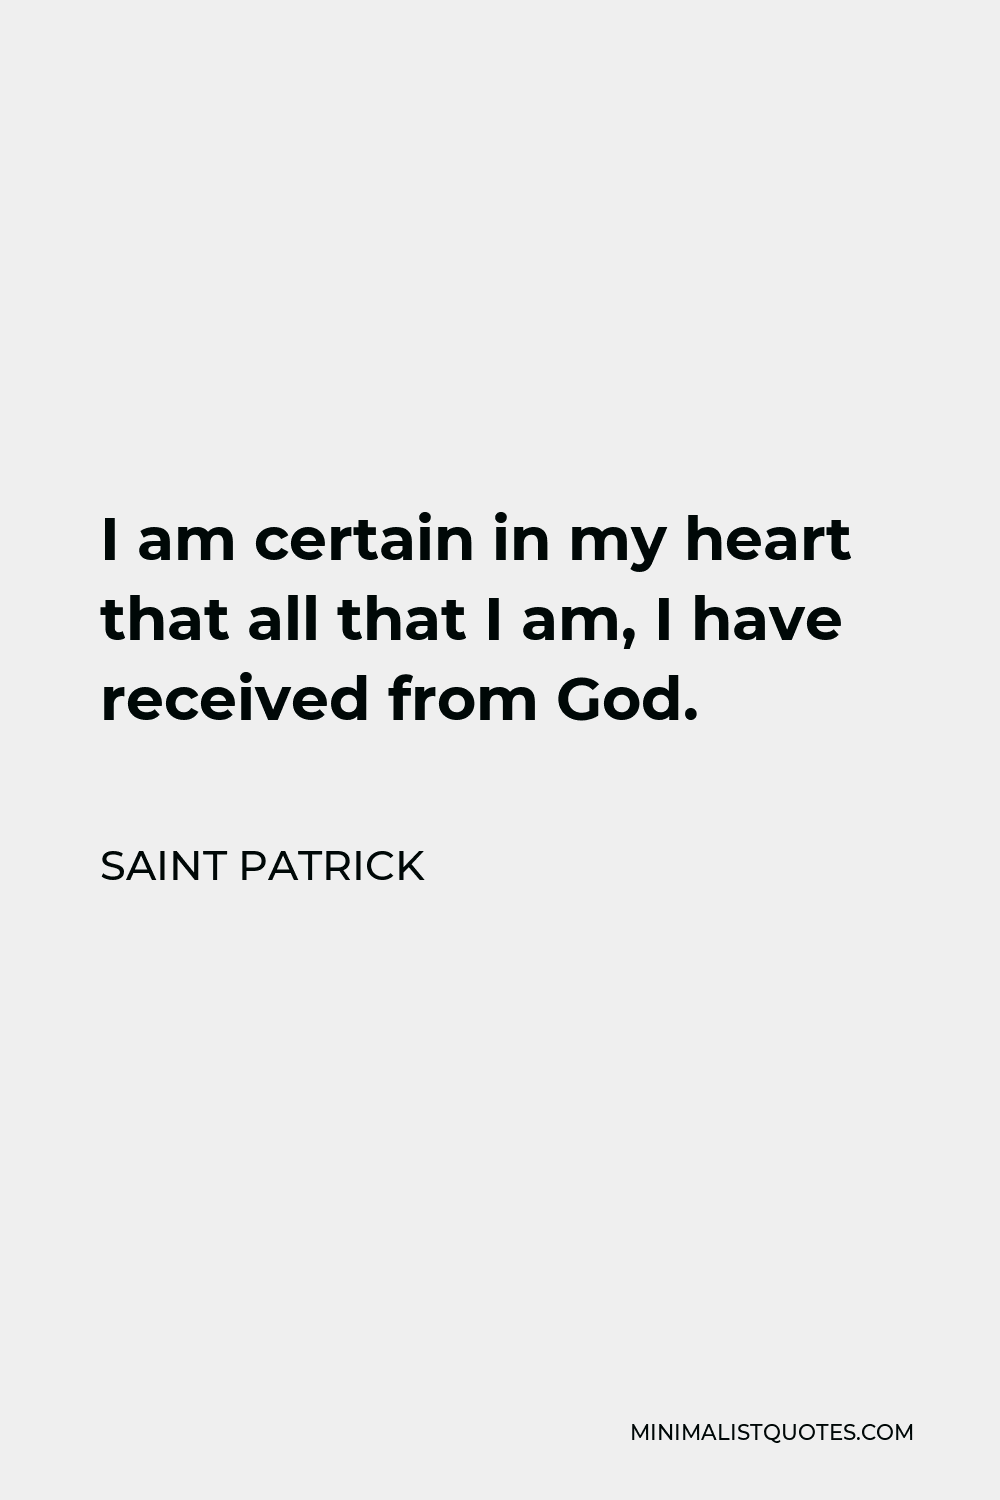 Saint Patrick Quote - I am certain in my heart that all that I am, I have received from God.